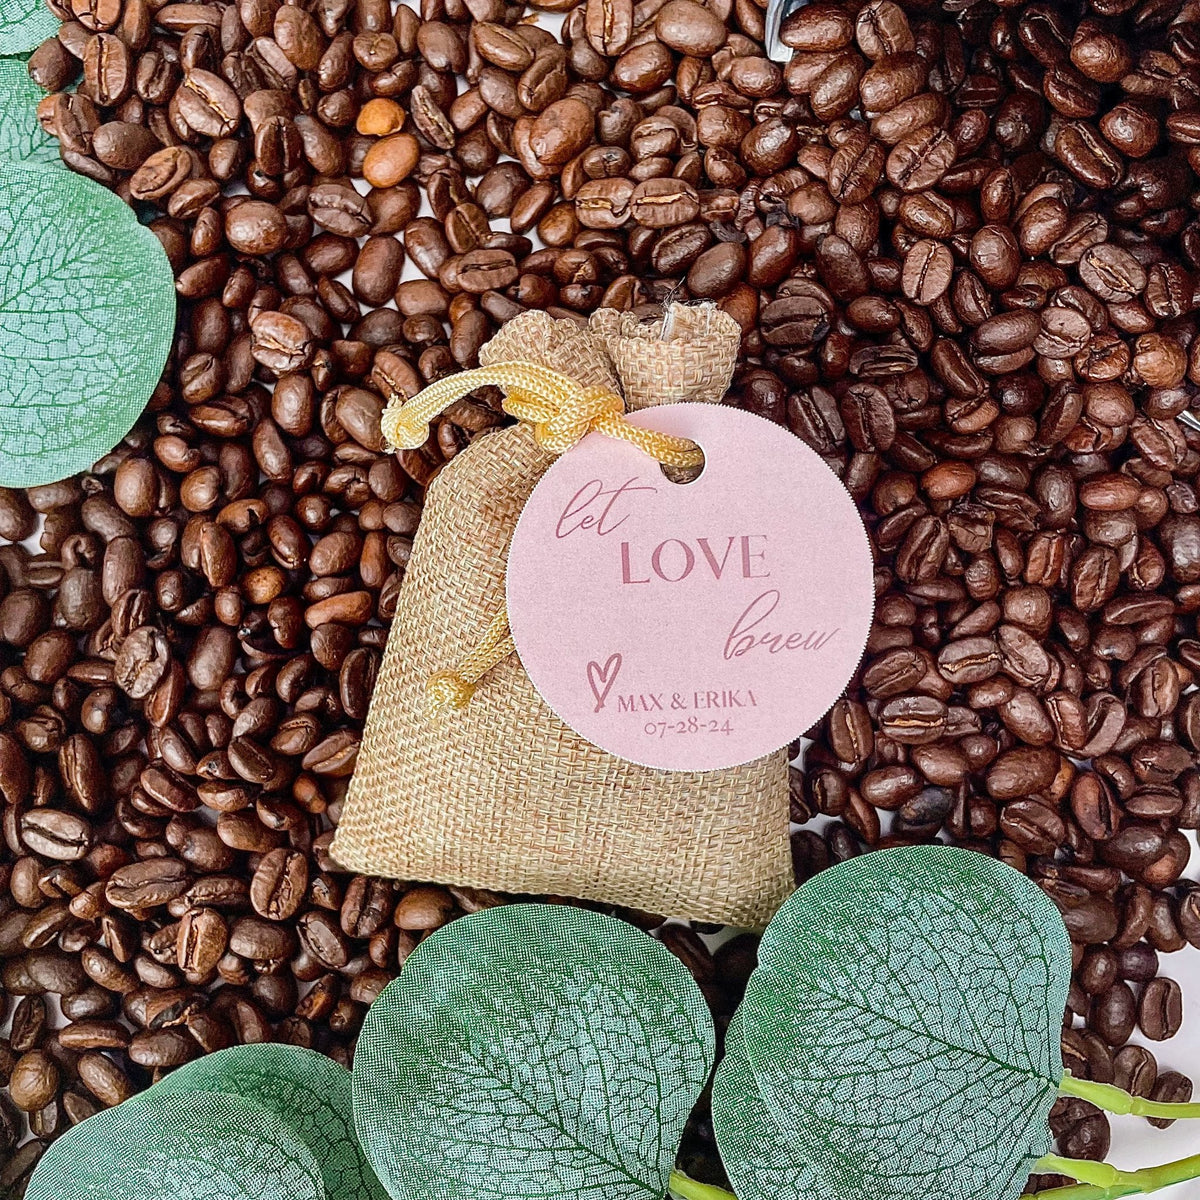 Let Love Brew Tag - Forever Wedding Favors